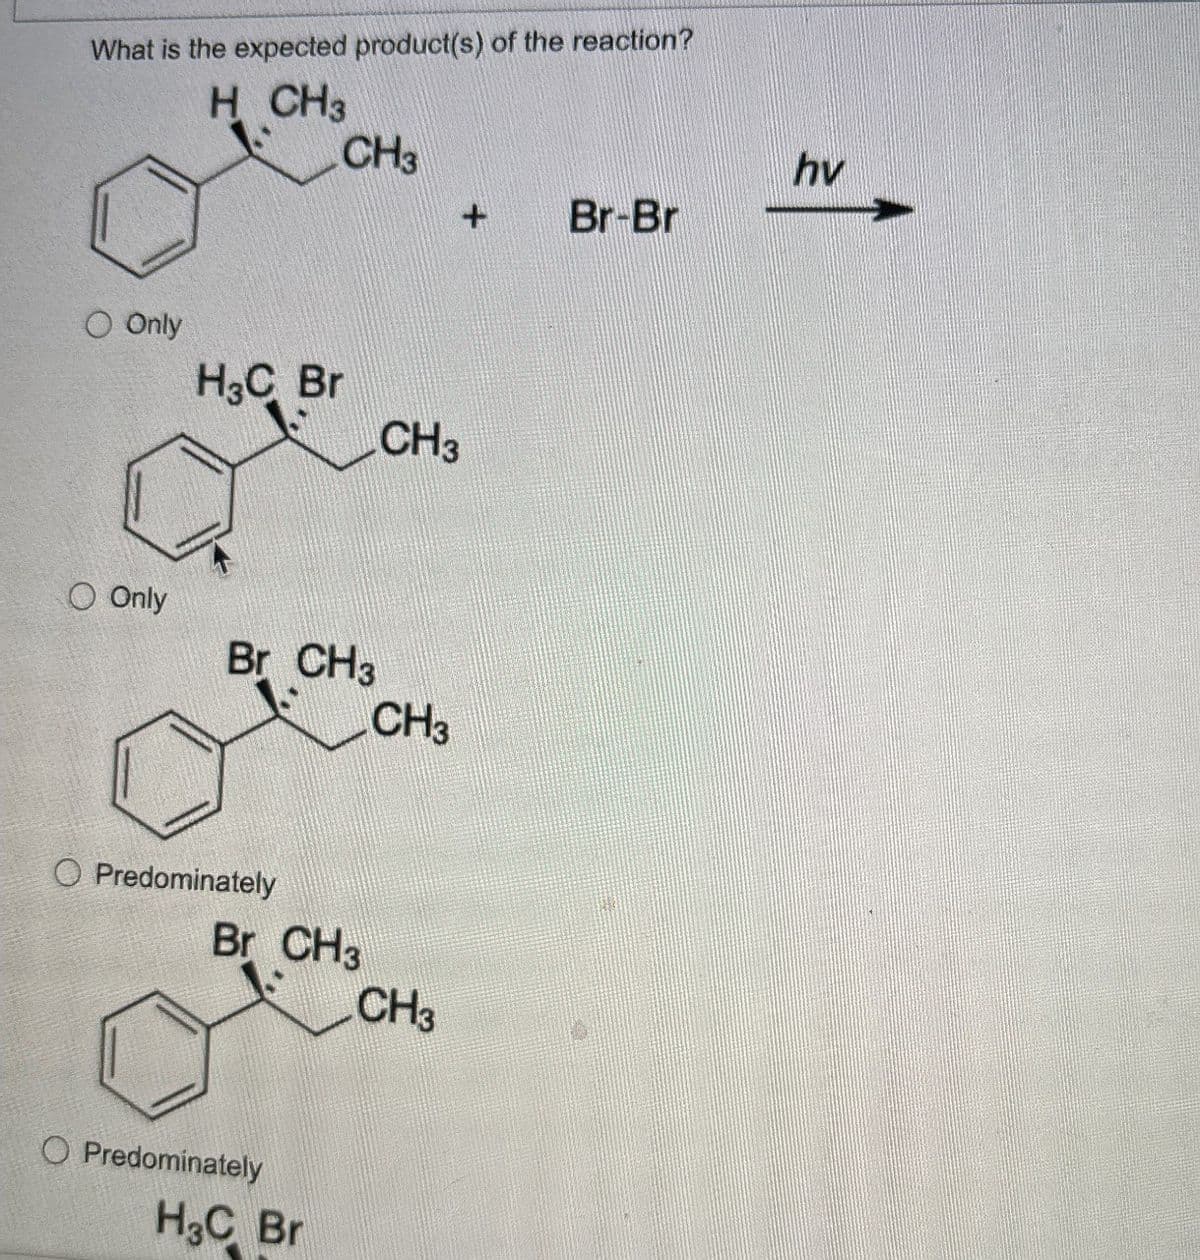 What is the expected product(s) of the reaction?
H
CH3
CH3
hv
+
Br-Br
O Only
H3C Br
CH3
O Only
Br CH3
CH3
Predominately
Br CH3
CH3
O Predominately
H3C Br